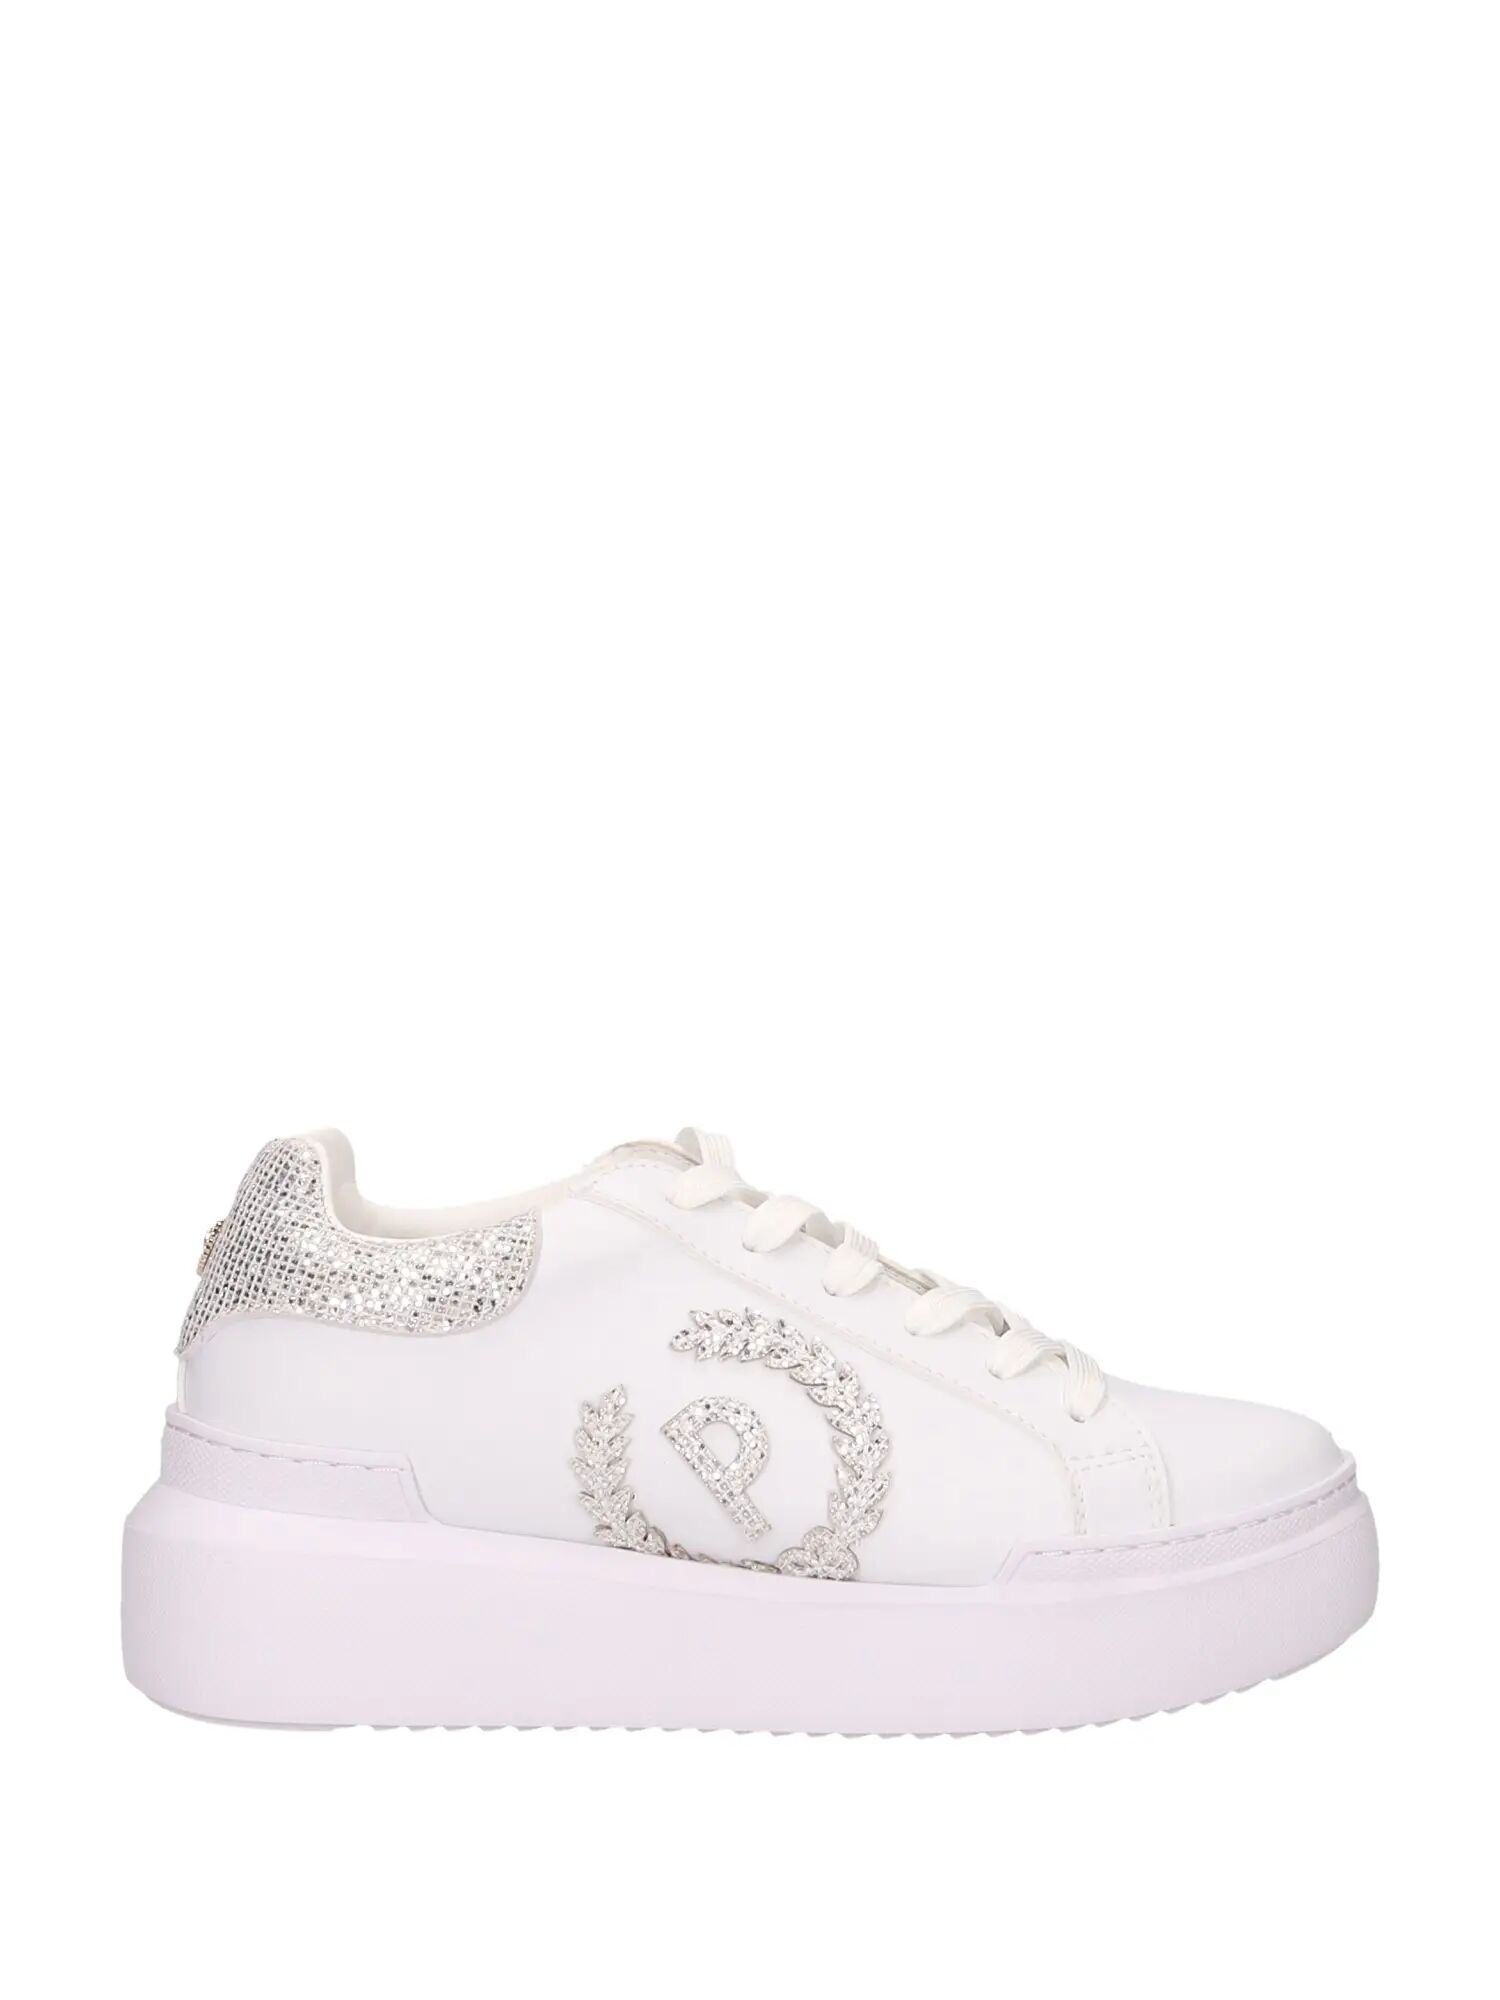 Pollini Sneakers Bianche Donna BIANCO/ARGENTO 36